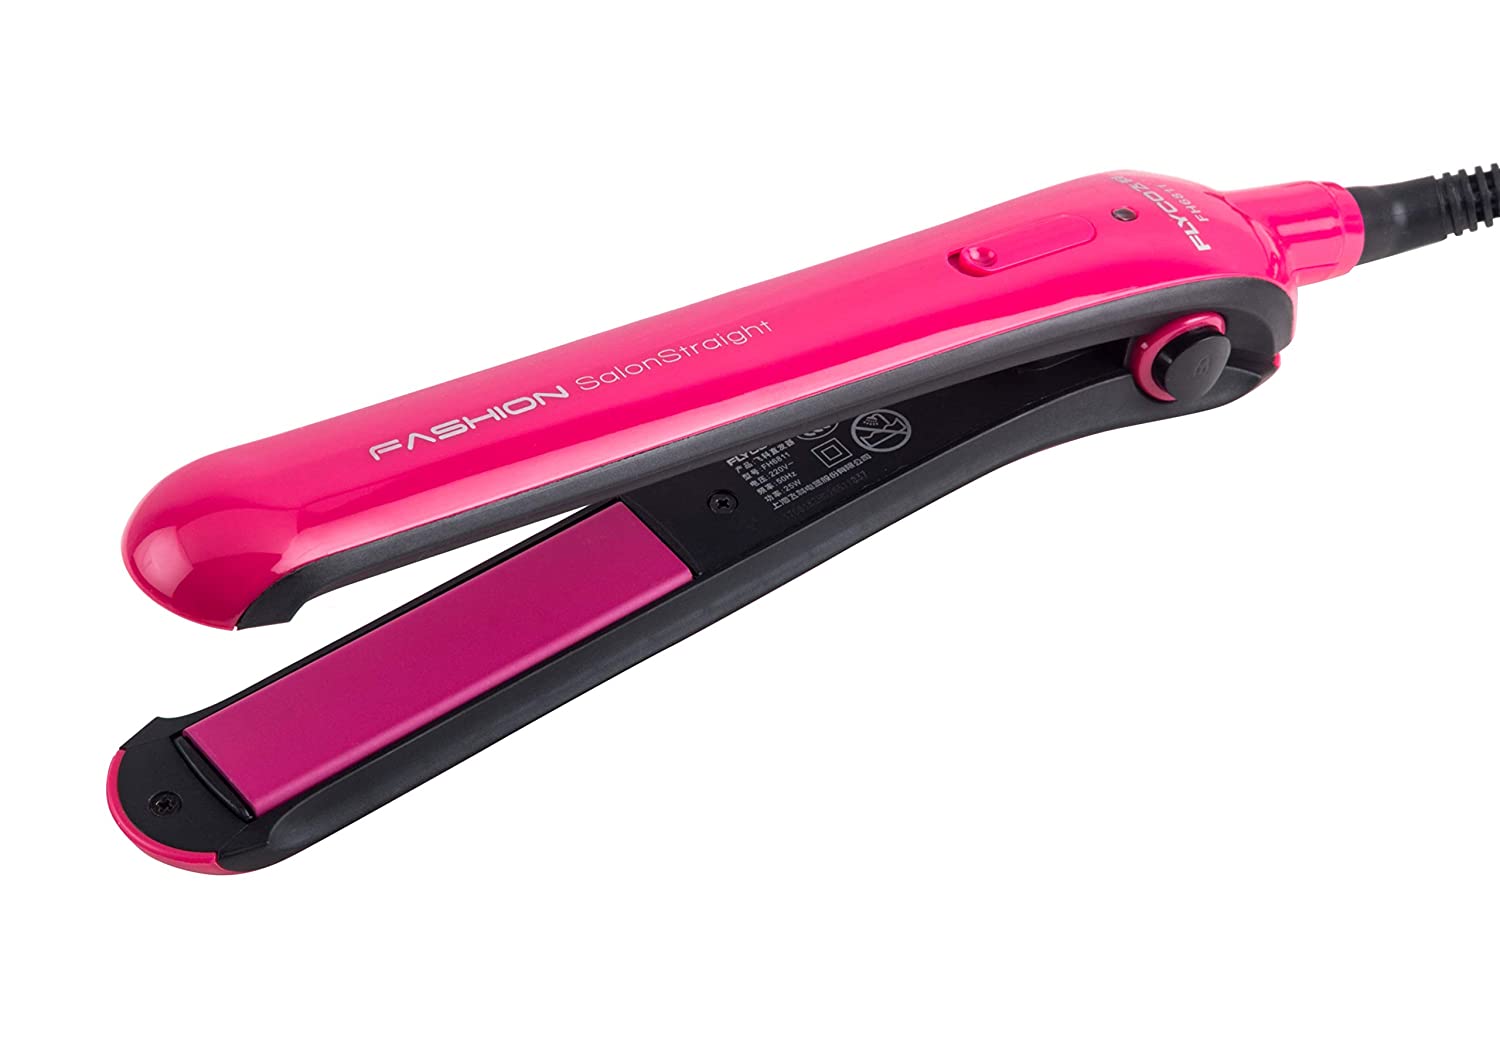 FLYCO FH6811 ELECTRIC HAIR CURLER STRAIGHTENER STYLING TOOL